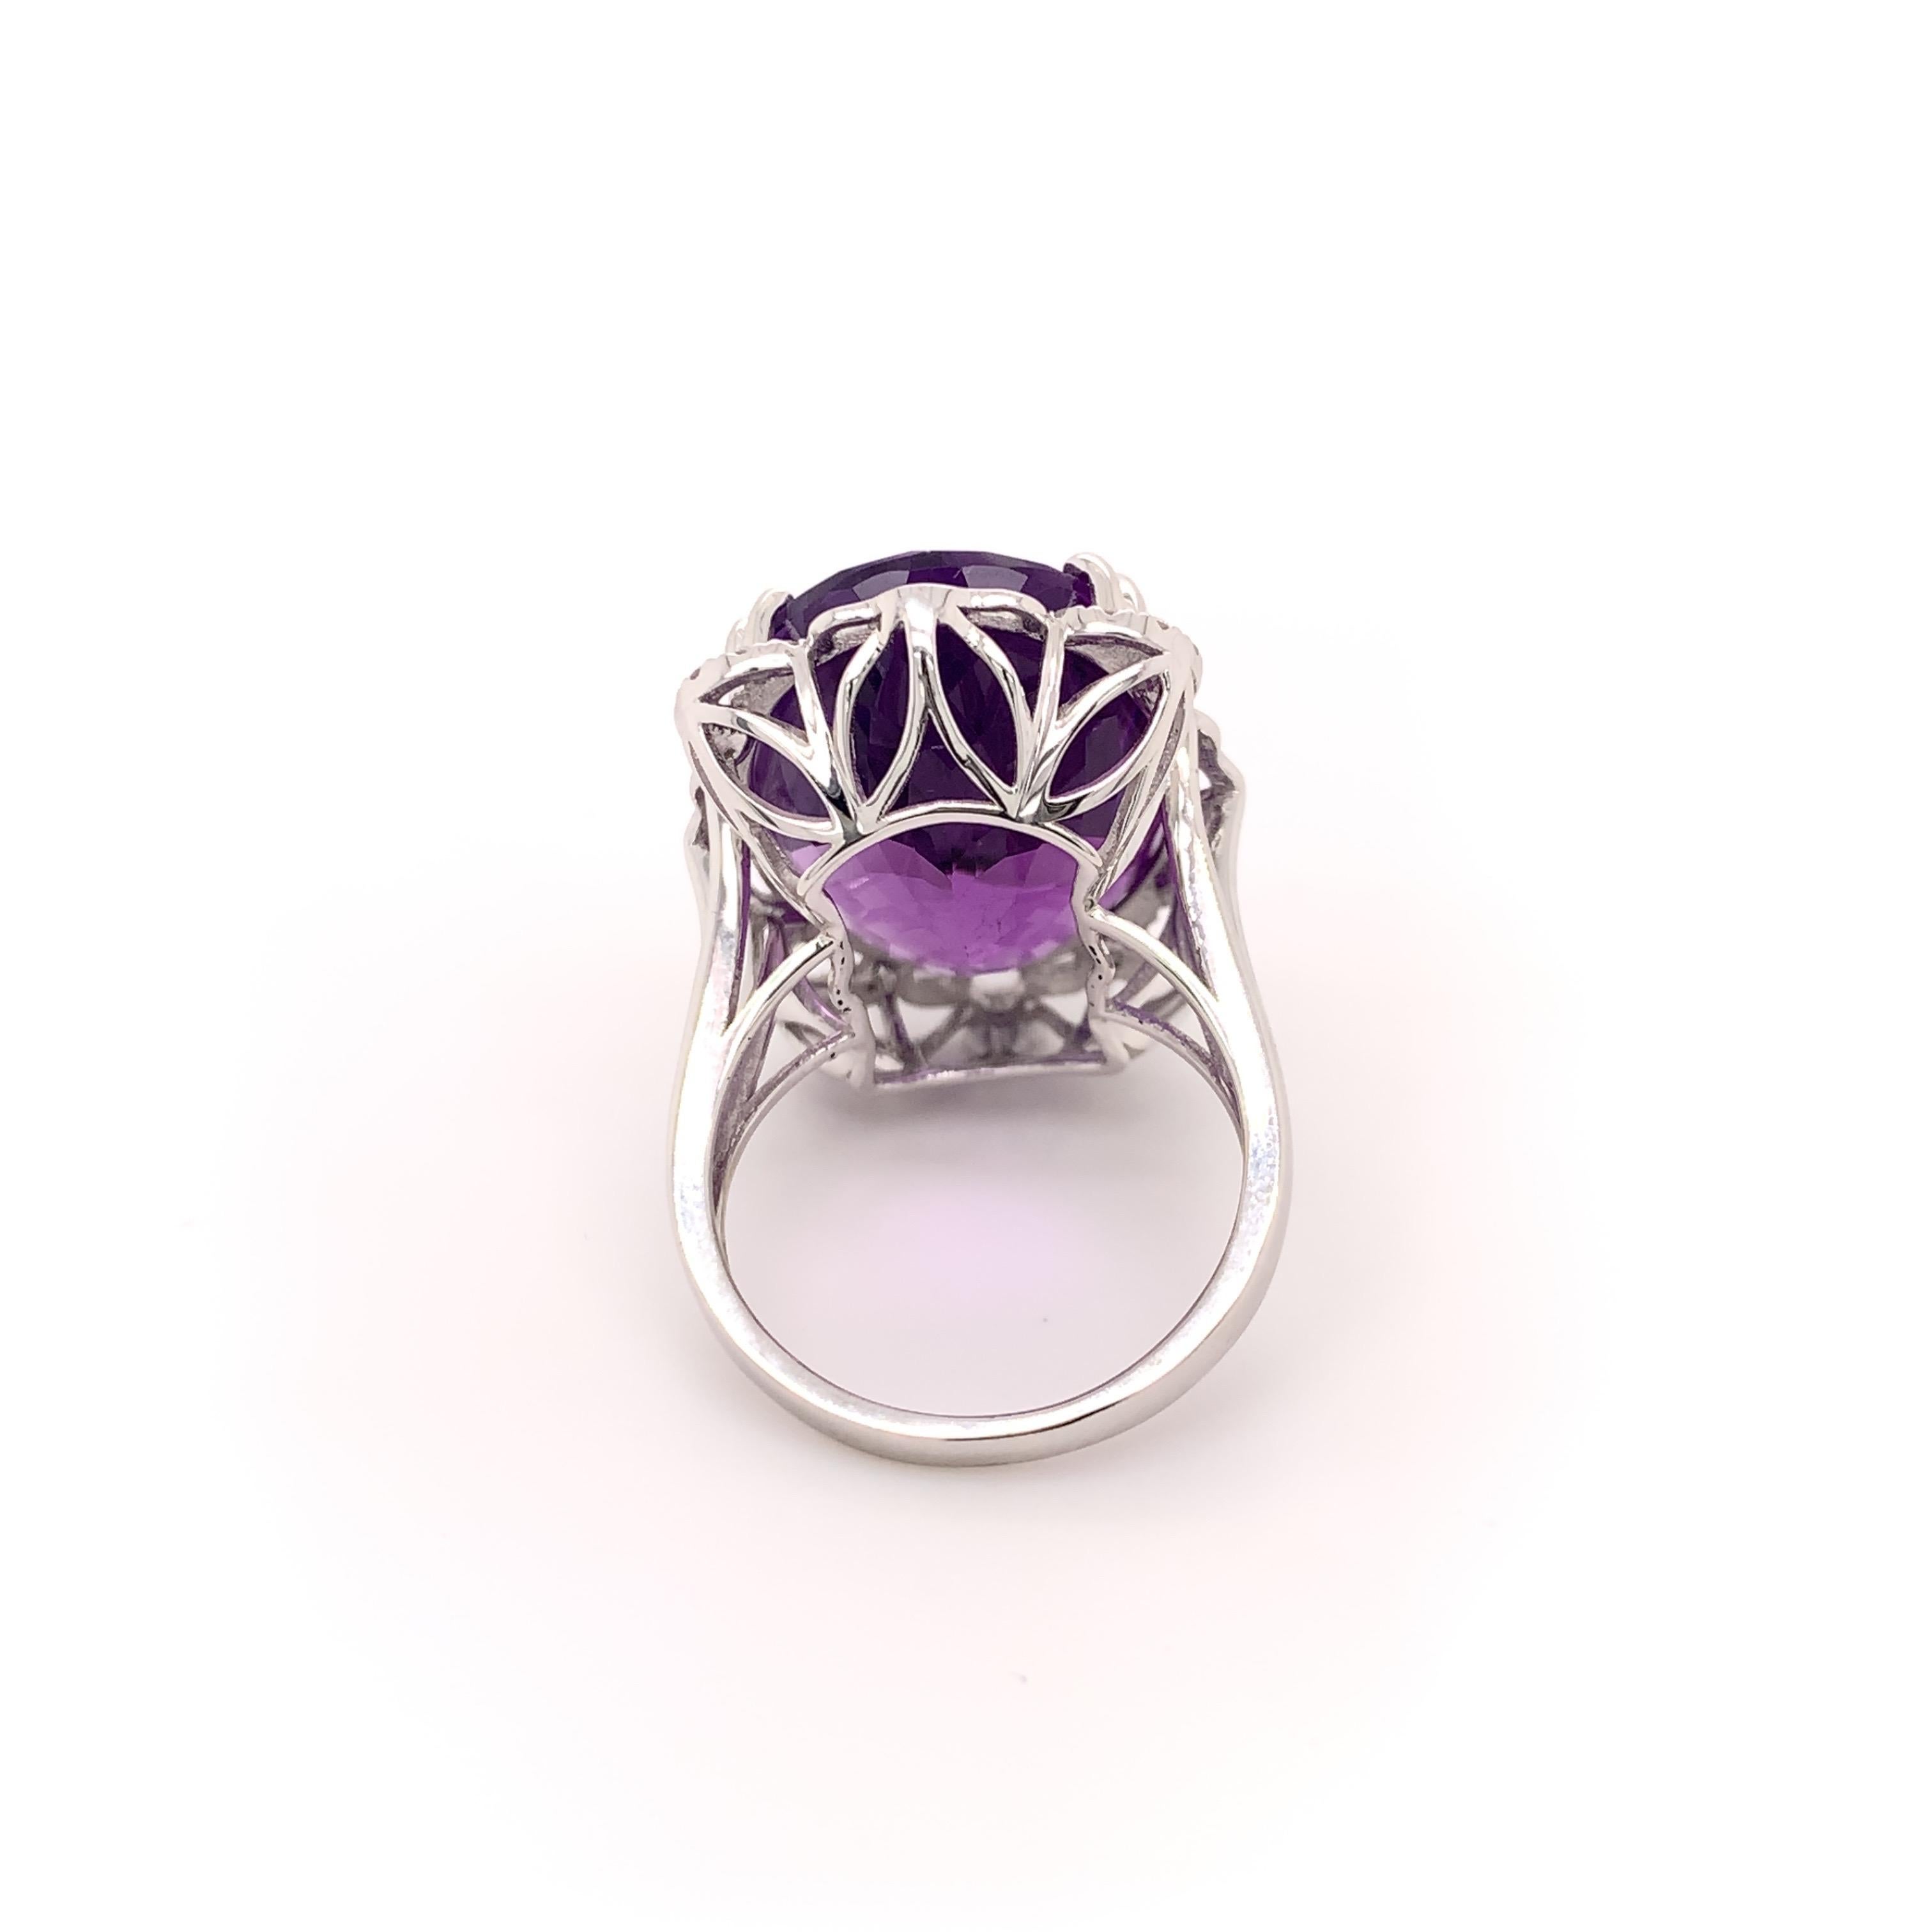 Oval Cut 19.51 Carat Amethyst Cocktail Ring